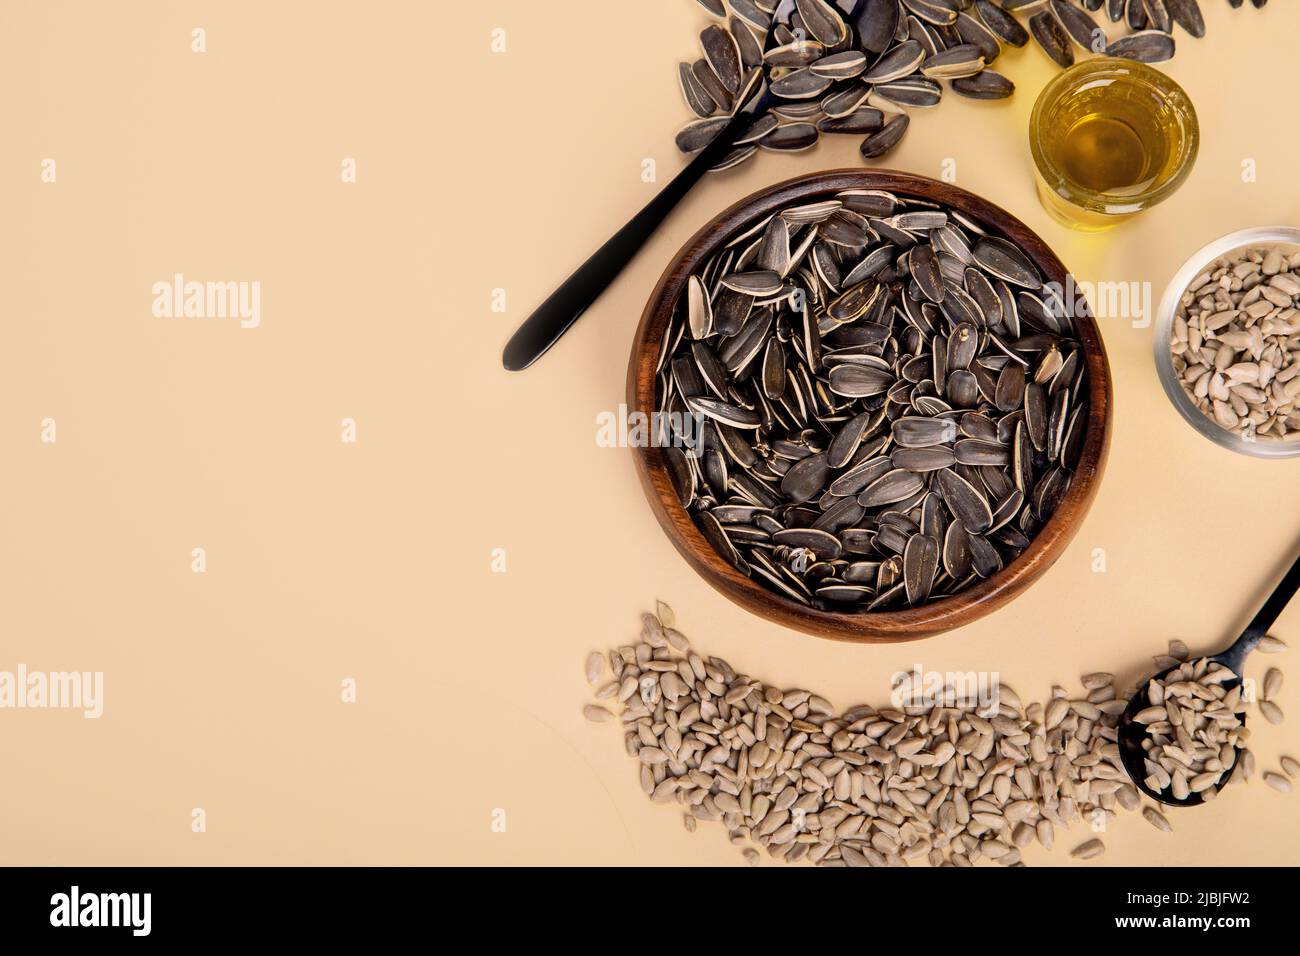 Sunflower oil and sunflower seeds on colourfull background. Organic concept. Healthy food and fats. Top view, copy space, flat lay Stock Photo